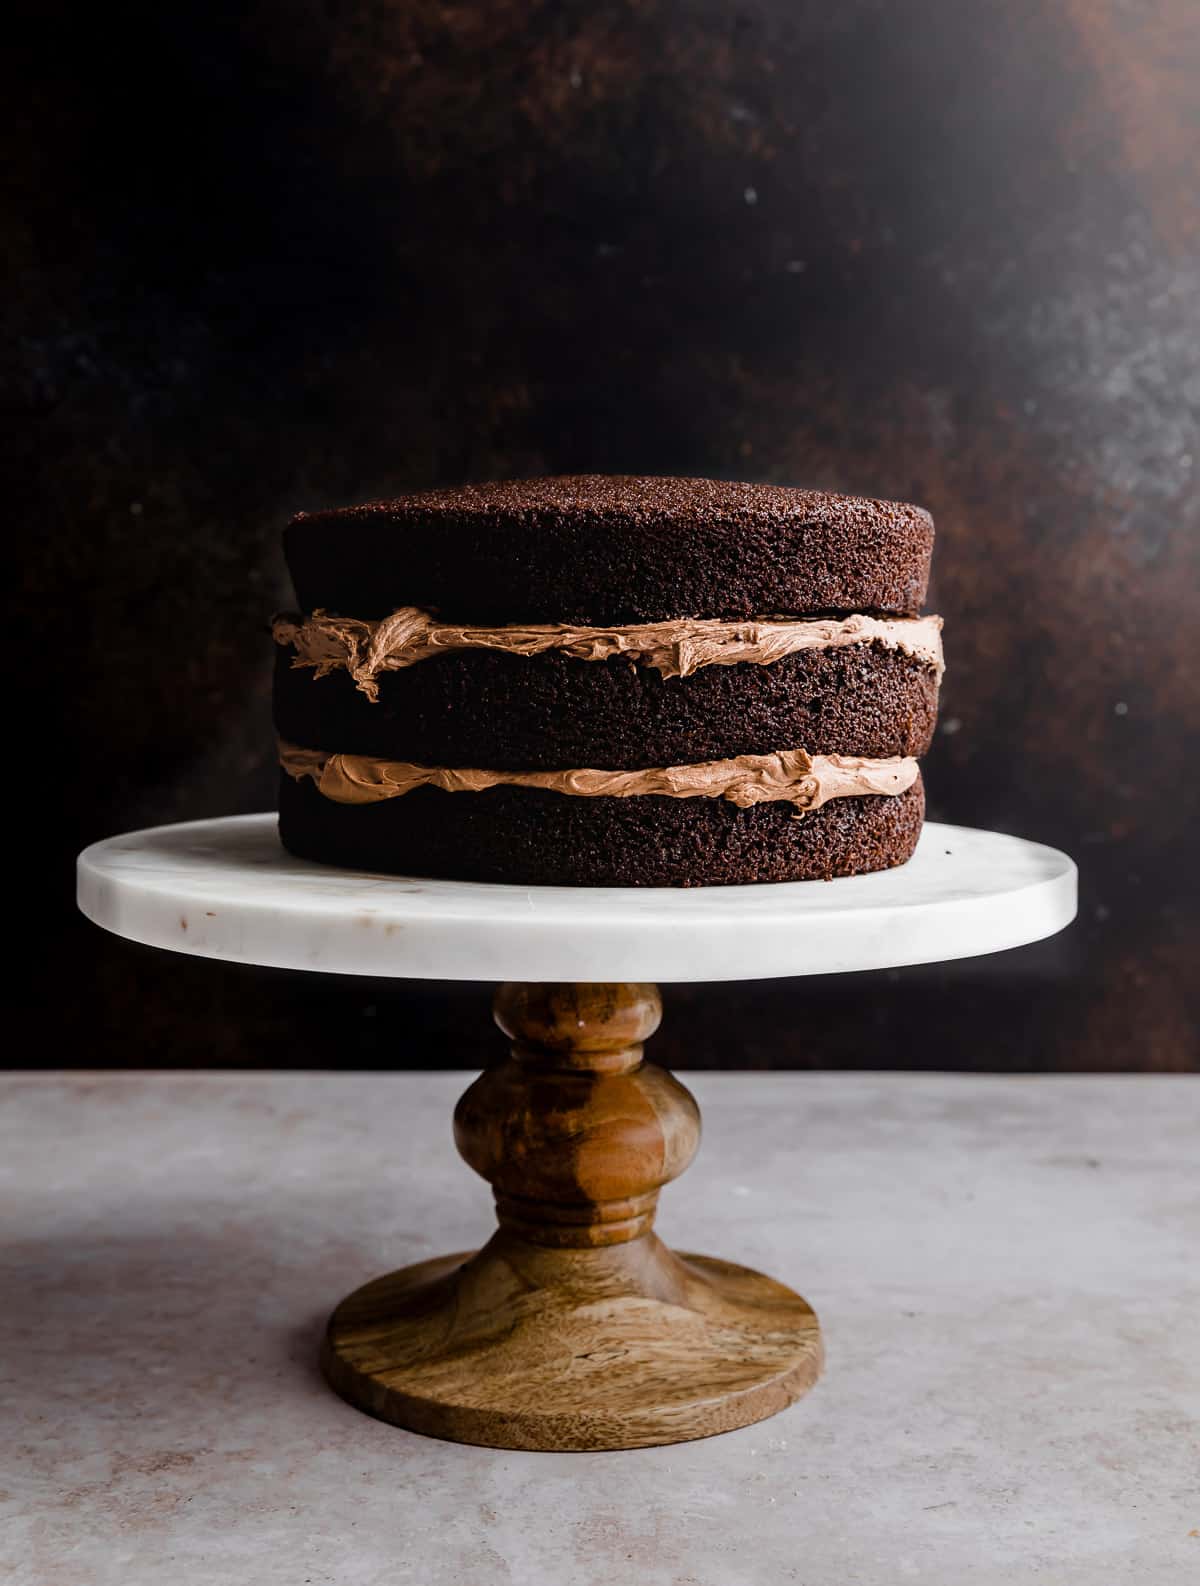 A three tiered chocolate cake with chocolate buttercream frosted between each layer.